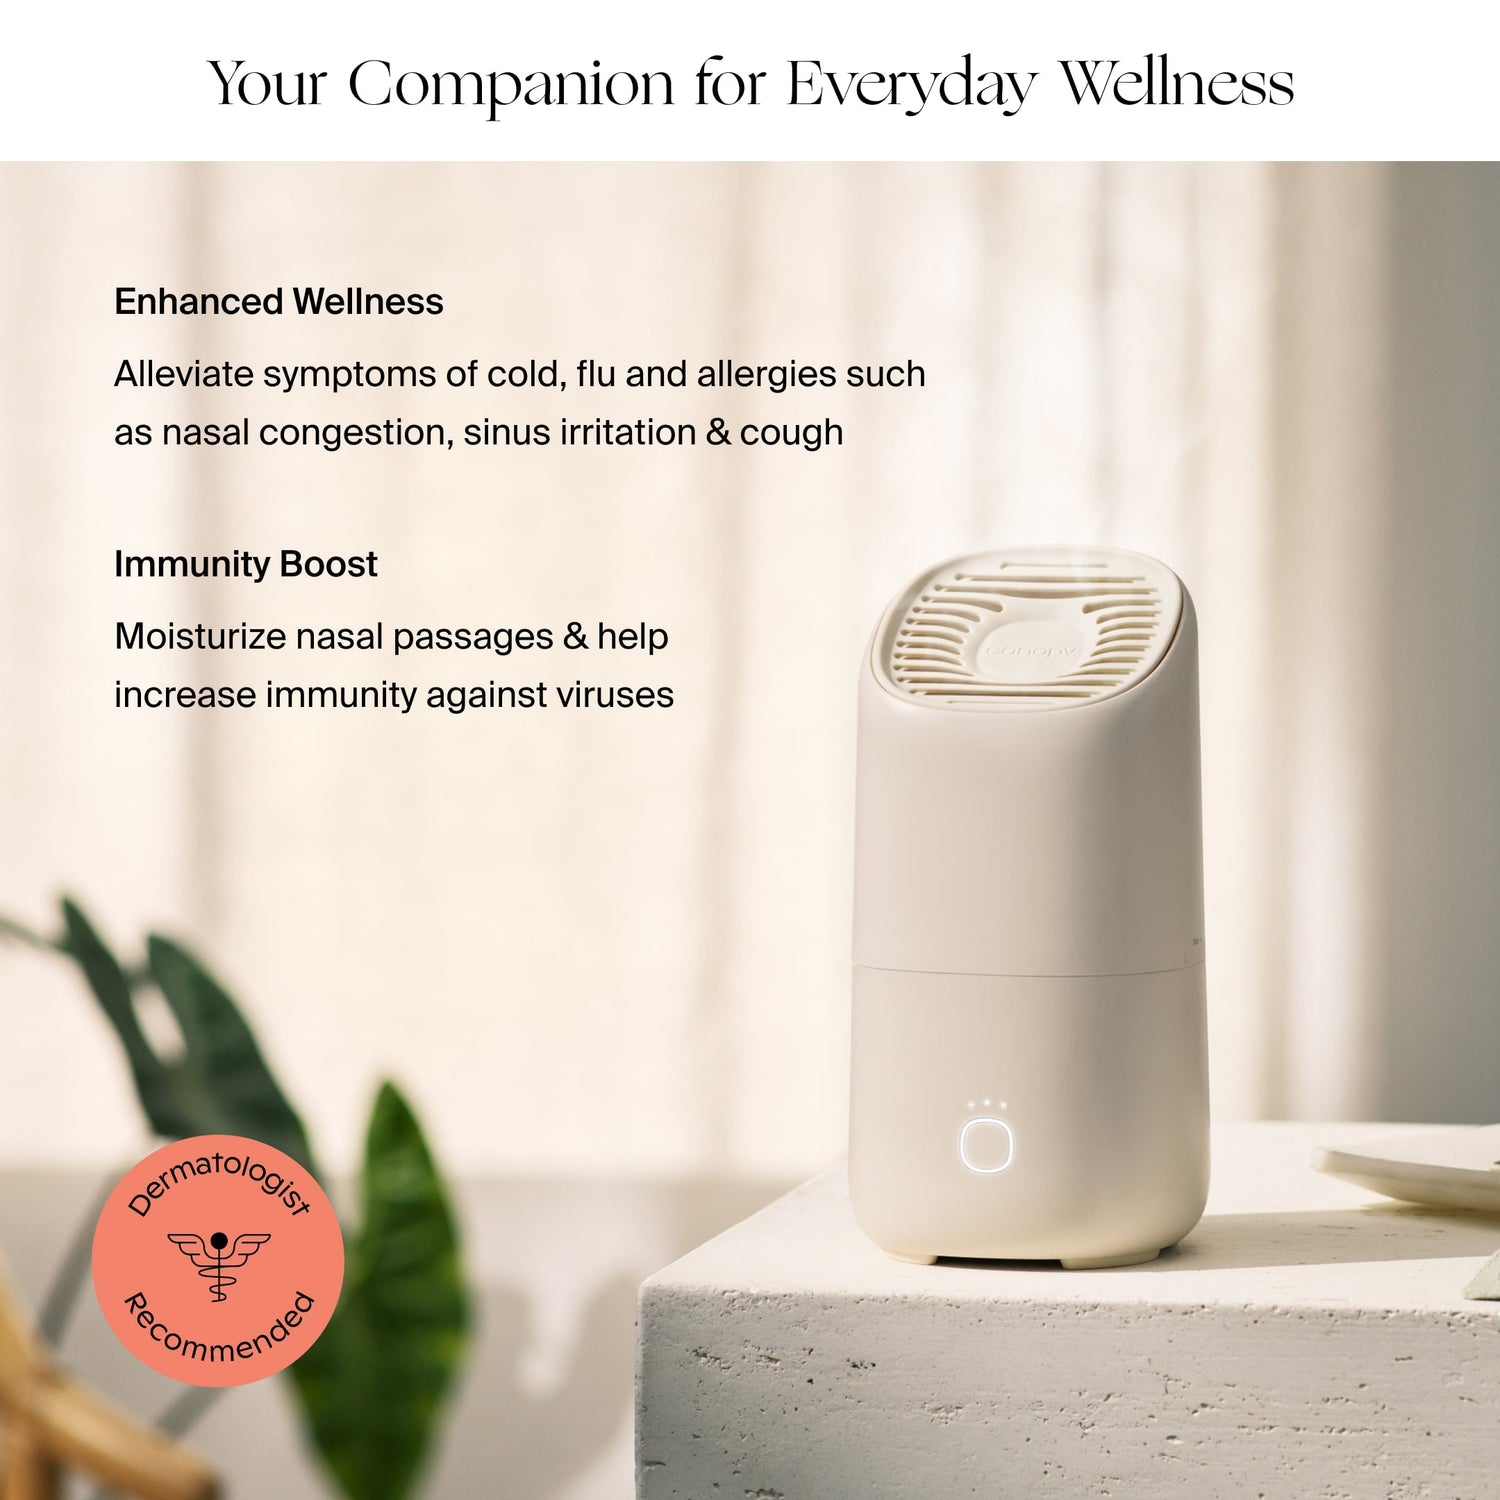 Portable Humidifier | Lifestyle, Your Companion for Everyday Wellness